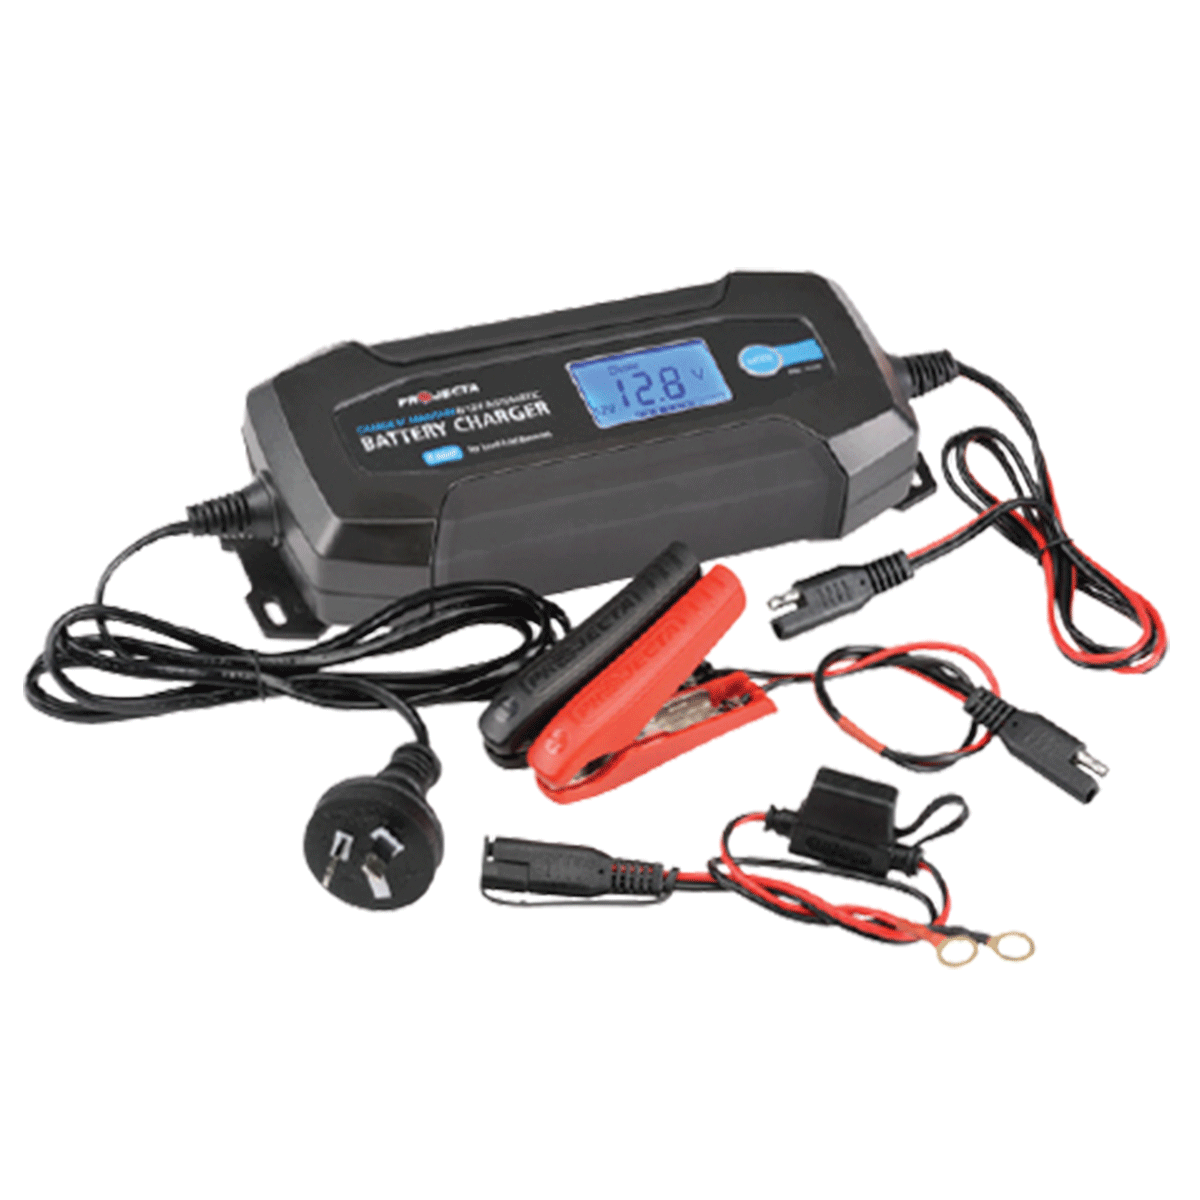 6/12V AUTOMATIC 4 AMP 8 stage Battery Charger